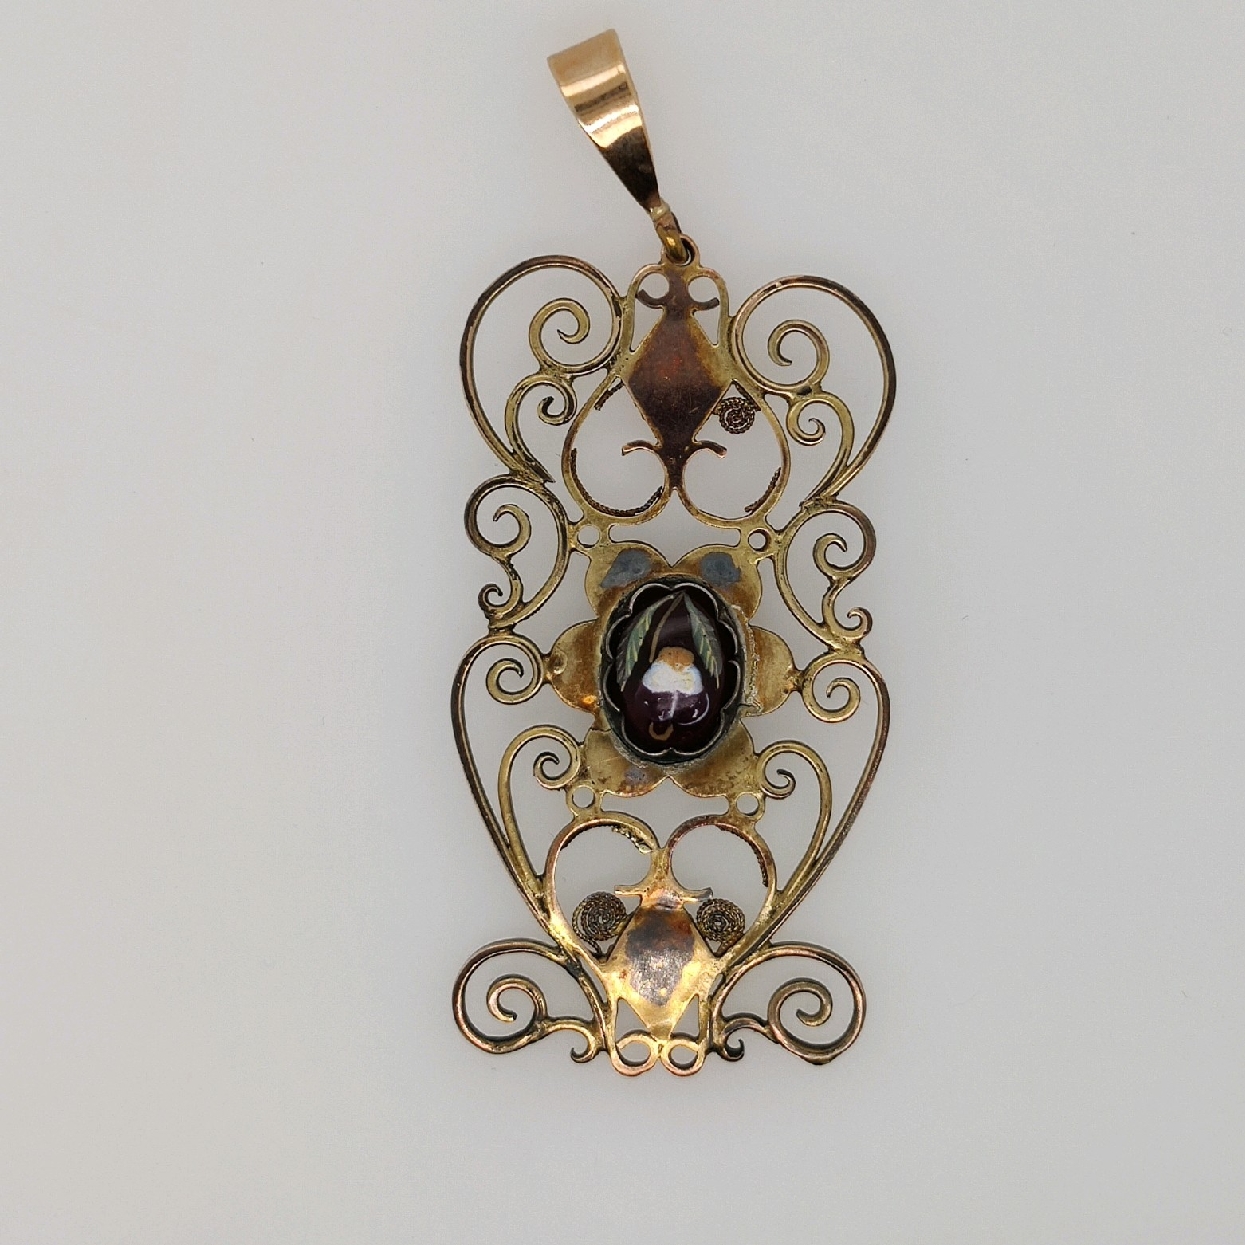 14K Yellow Gold Filigree Pendant with Glass Floral Center